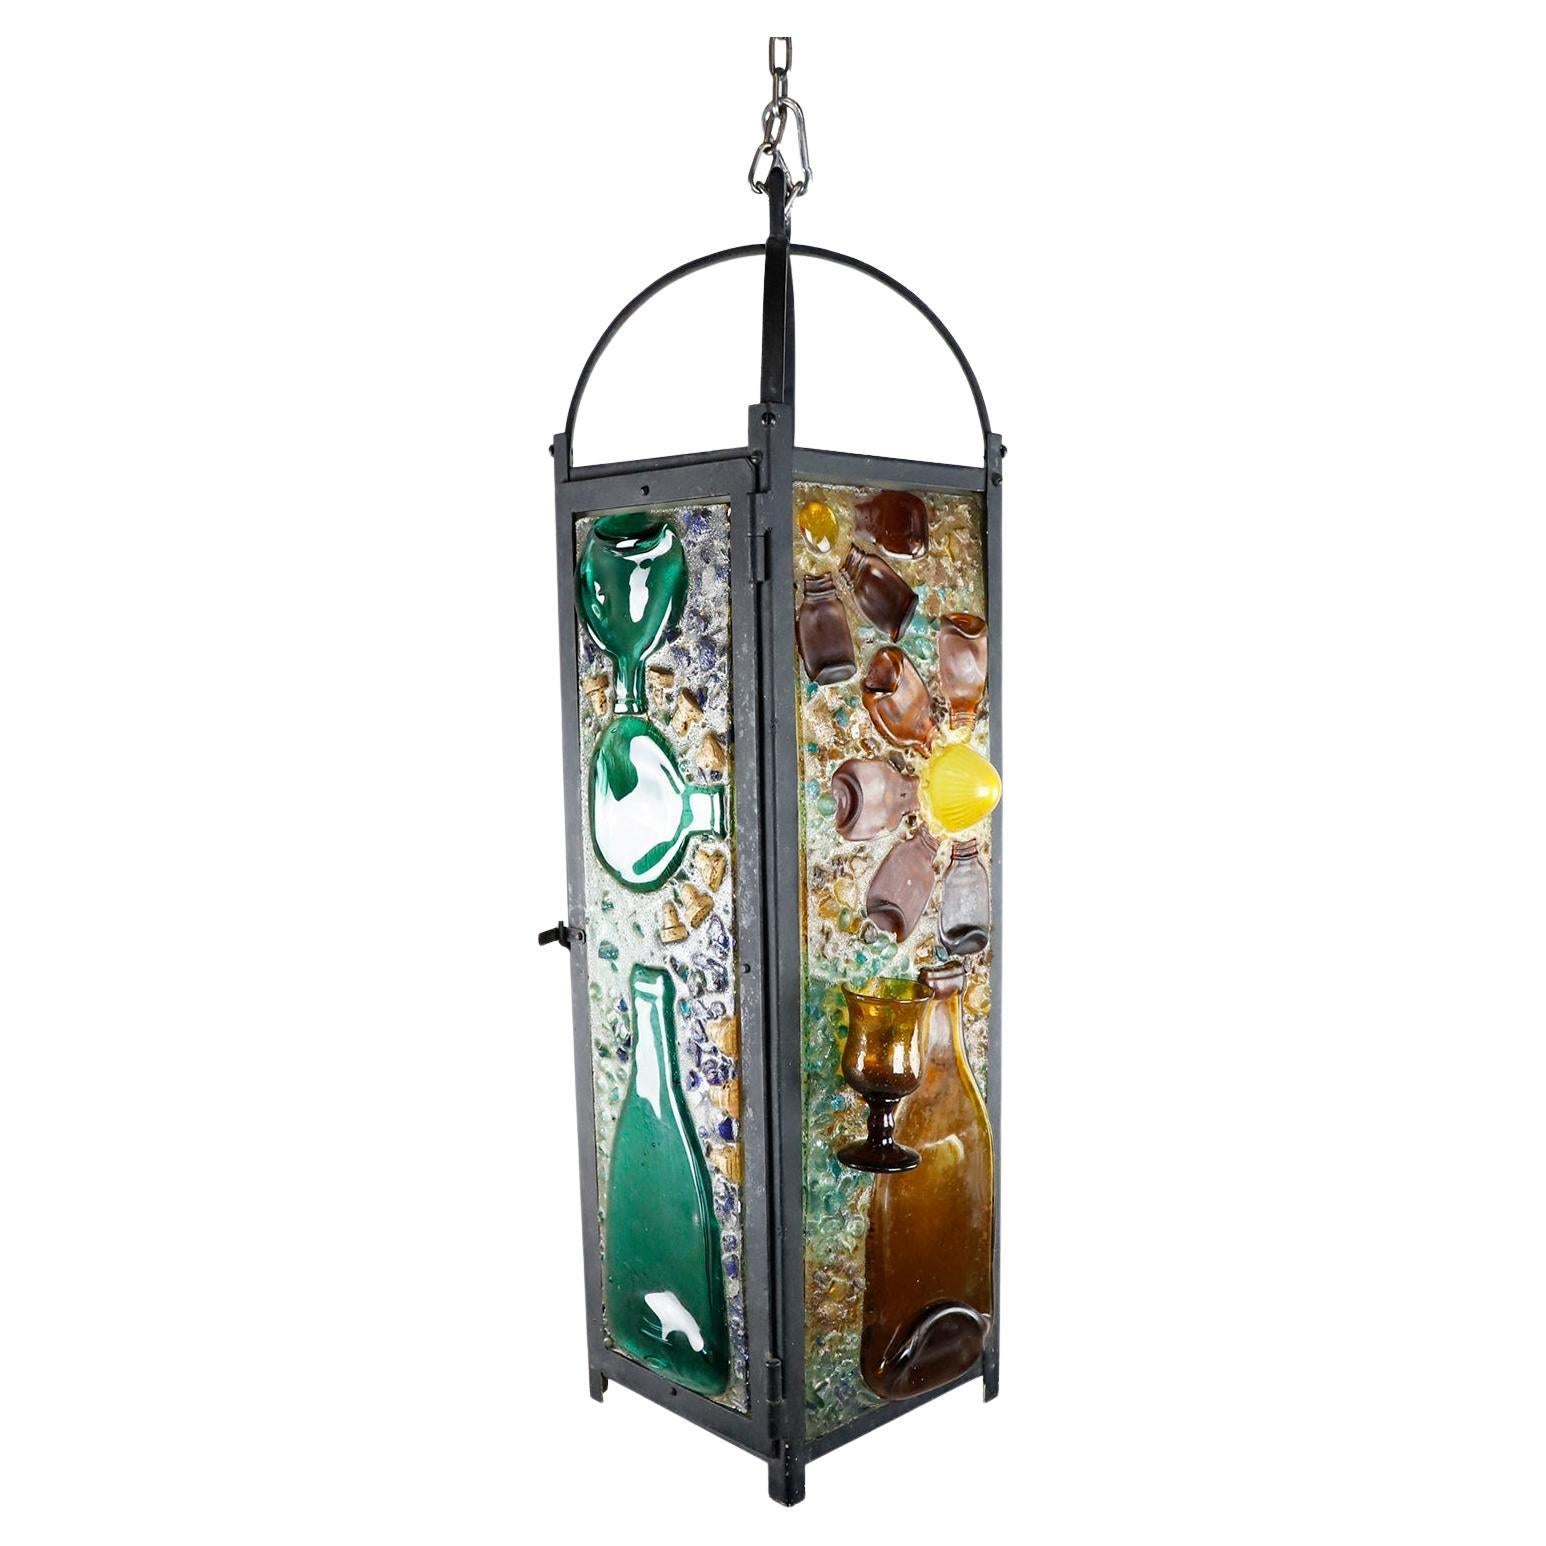 Big Size Artesanal Recycled Glass Color Chandelier For Sale